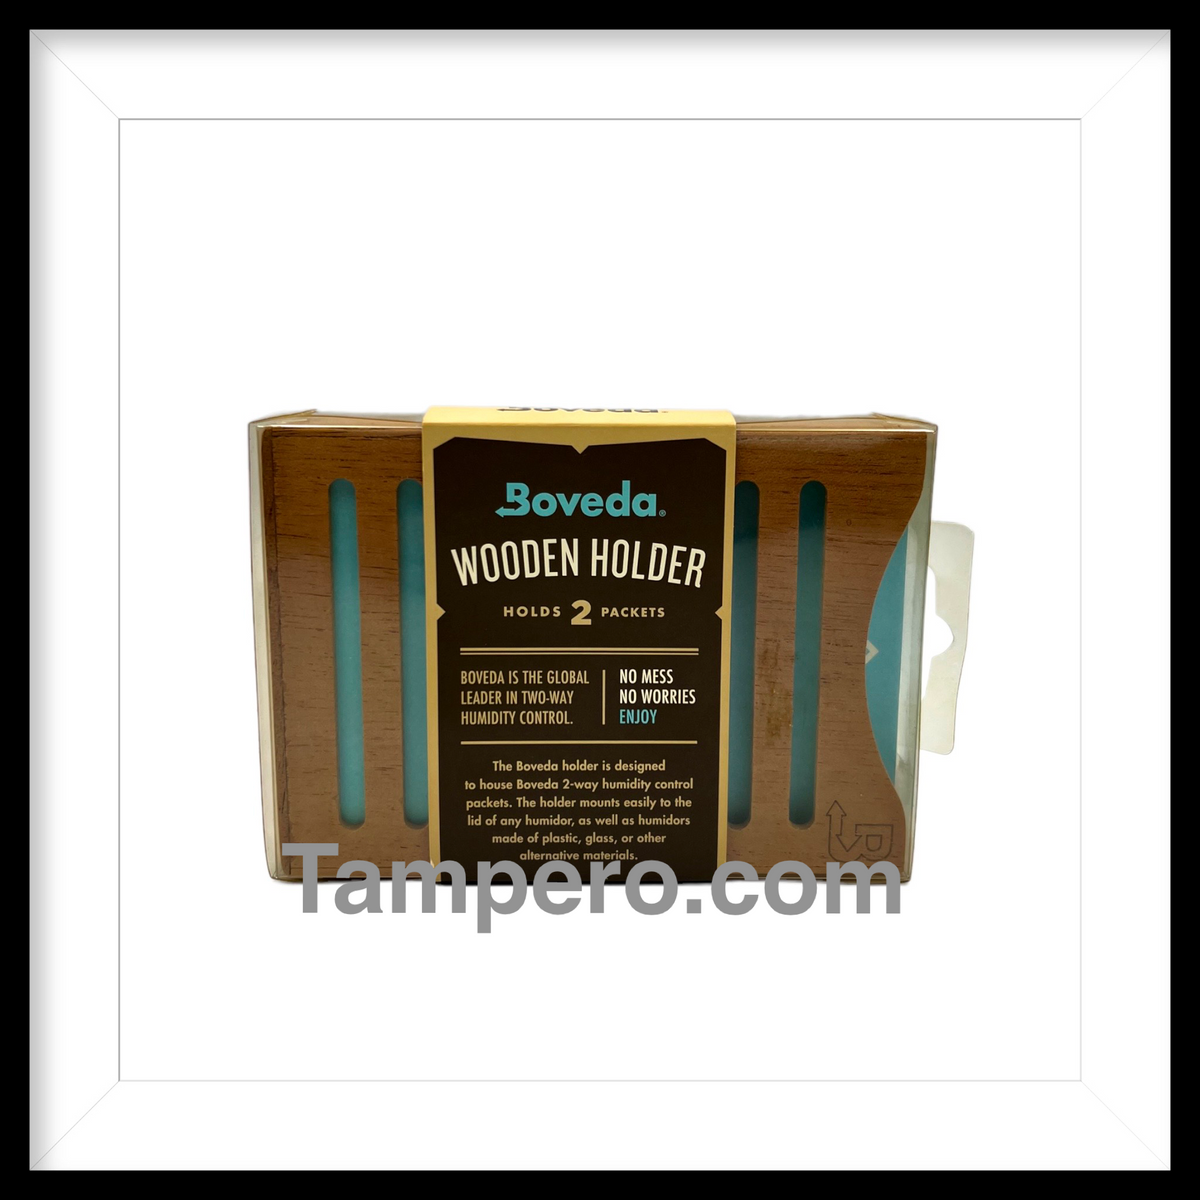 Boveda Wooden Holder For Containers Holds 2 Packets